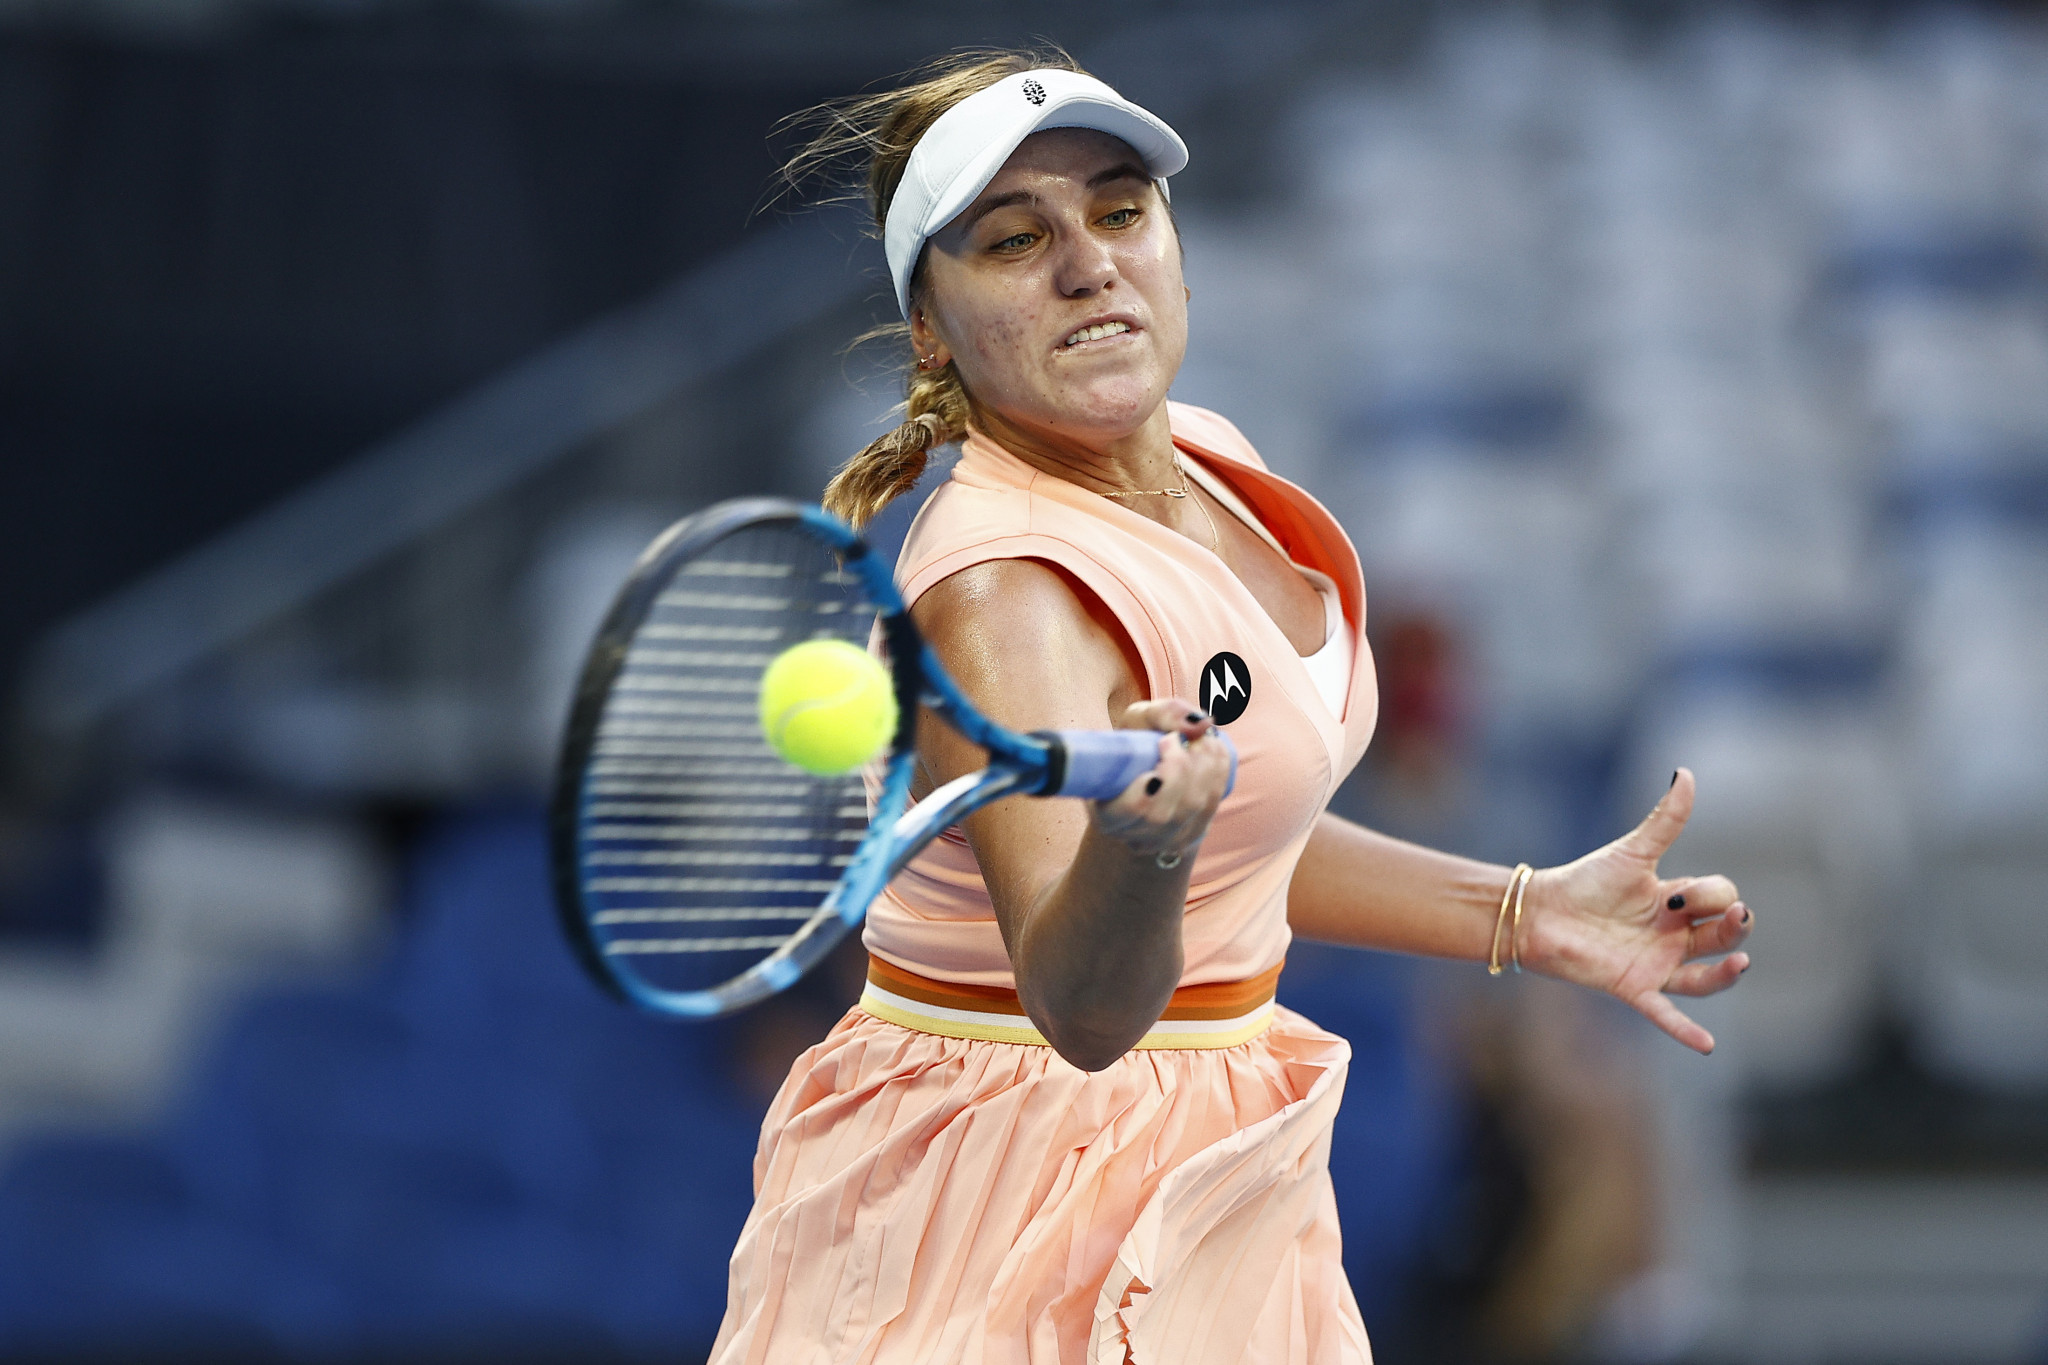 Former champion Kenin bows out as Barty claims quickfire win at Australian Open